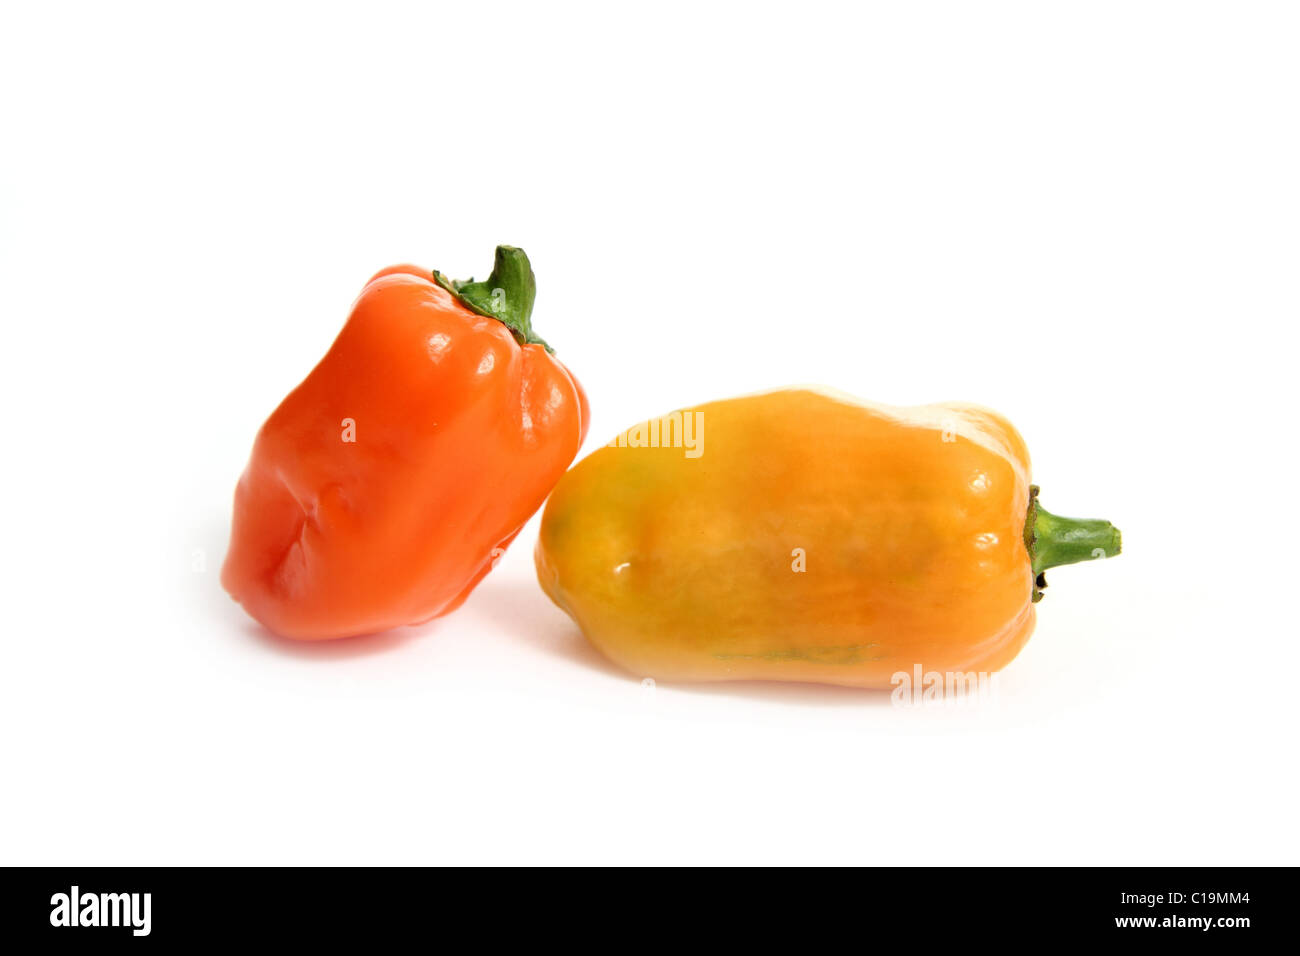 Habanero Capsicum chili hottest pepper in the world from Mexico Stock Photo